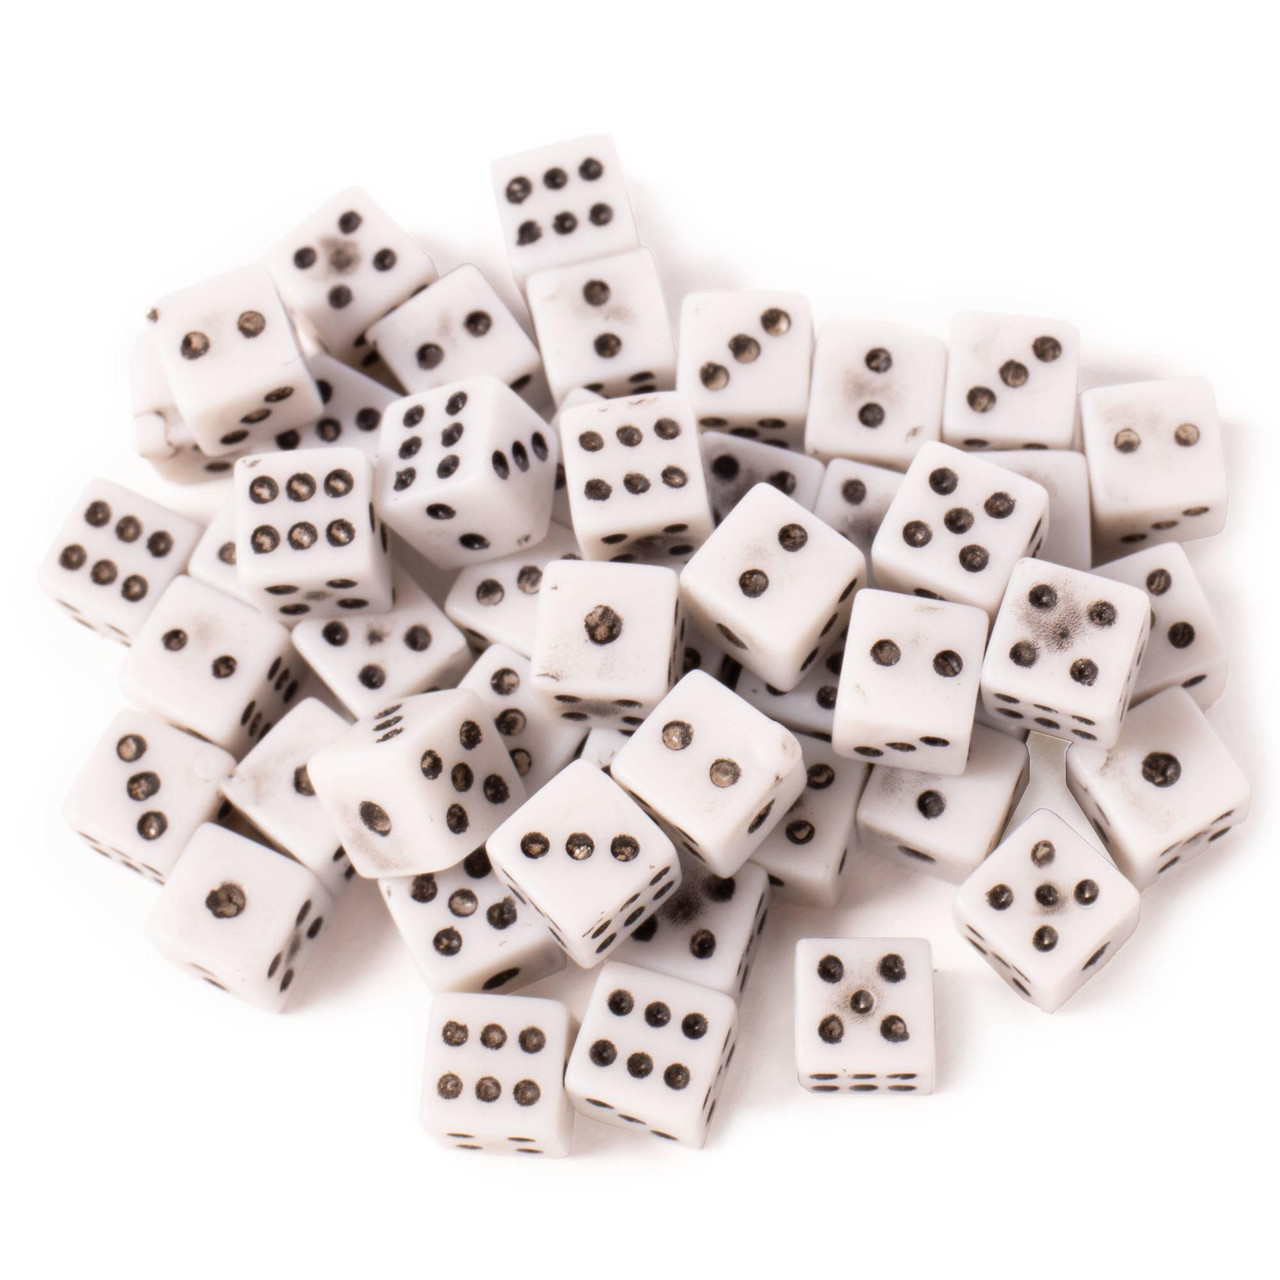 Opaque White 5mm Tiny NEW Dice Set of 25 D6 